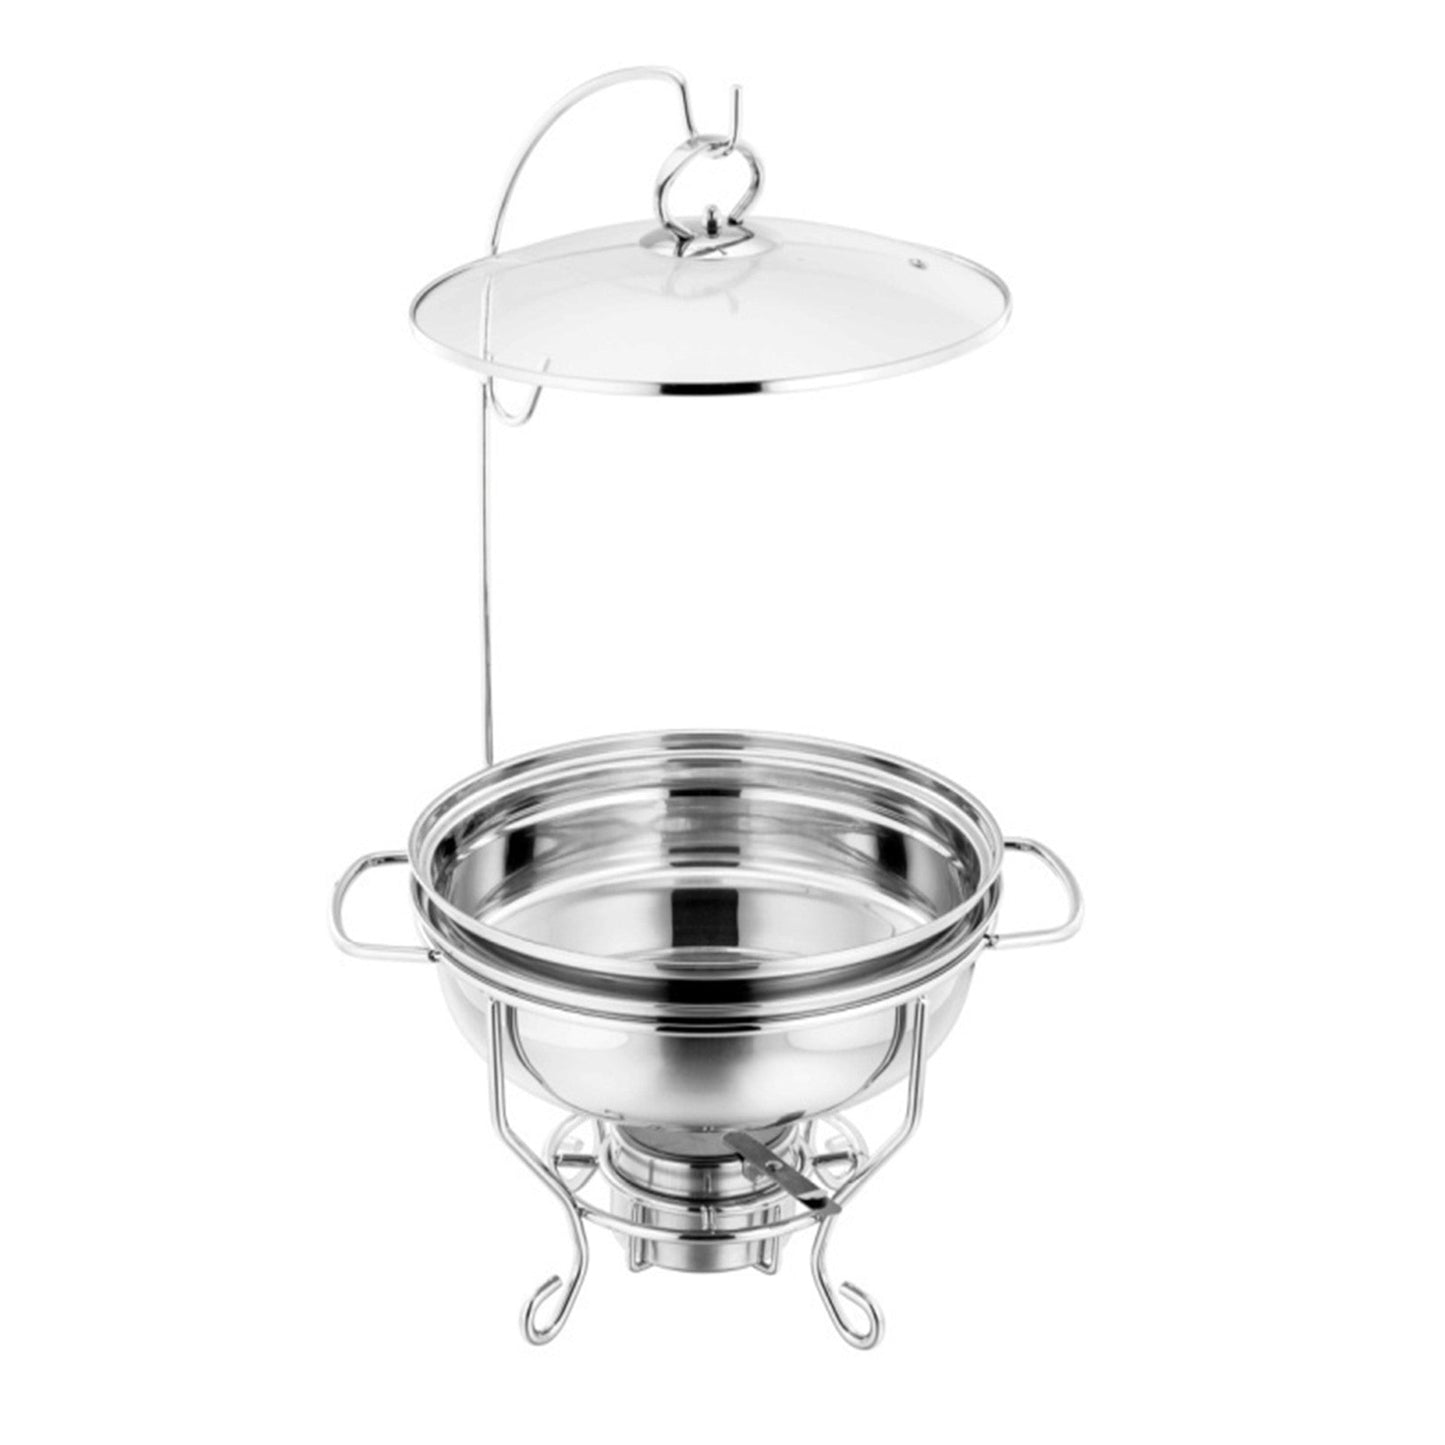 SQ Round Banquet Buffet Chafing Dish with Glass Lid 6 L 10853 (Big Parcel Rate)